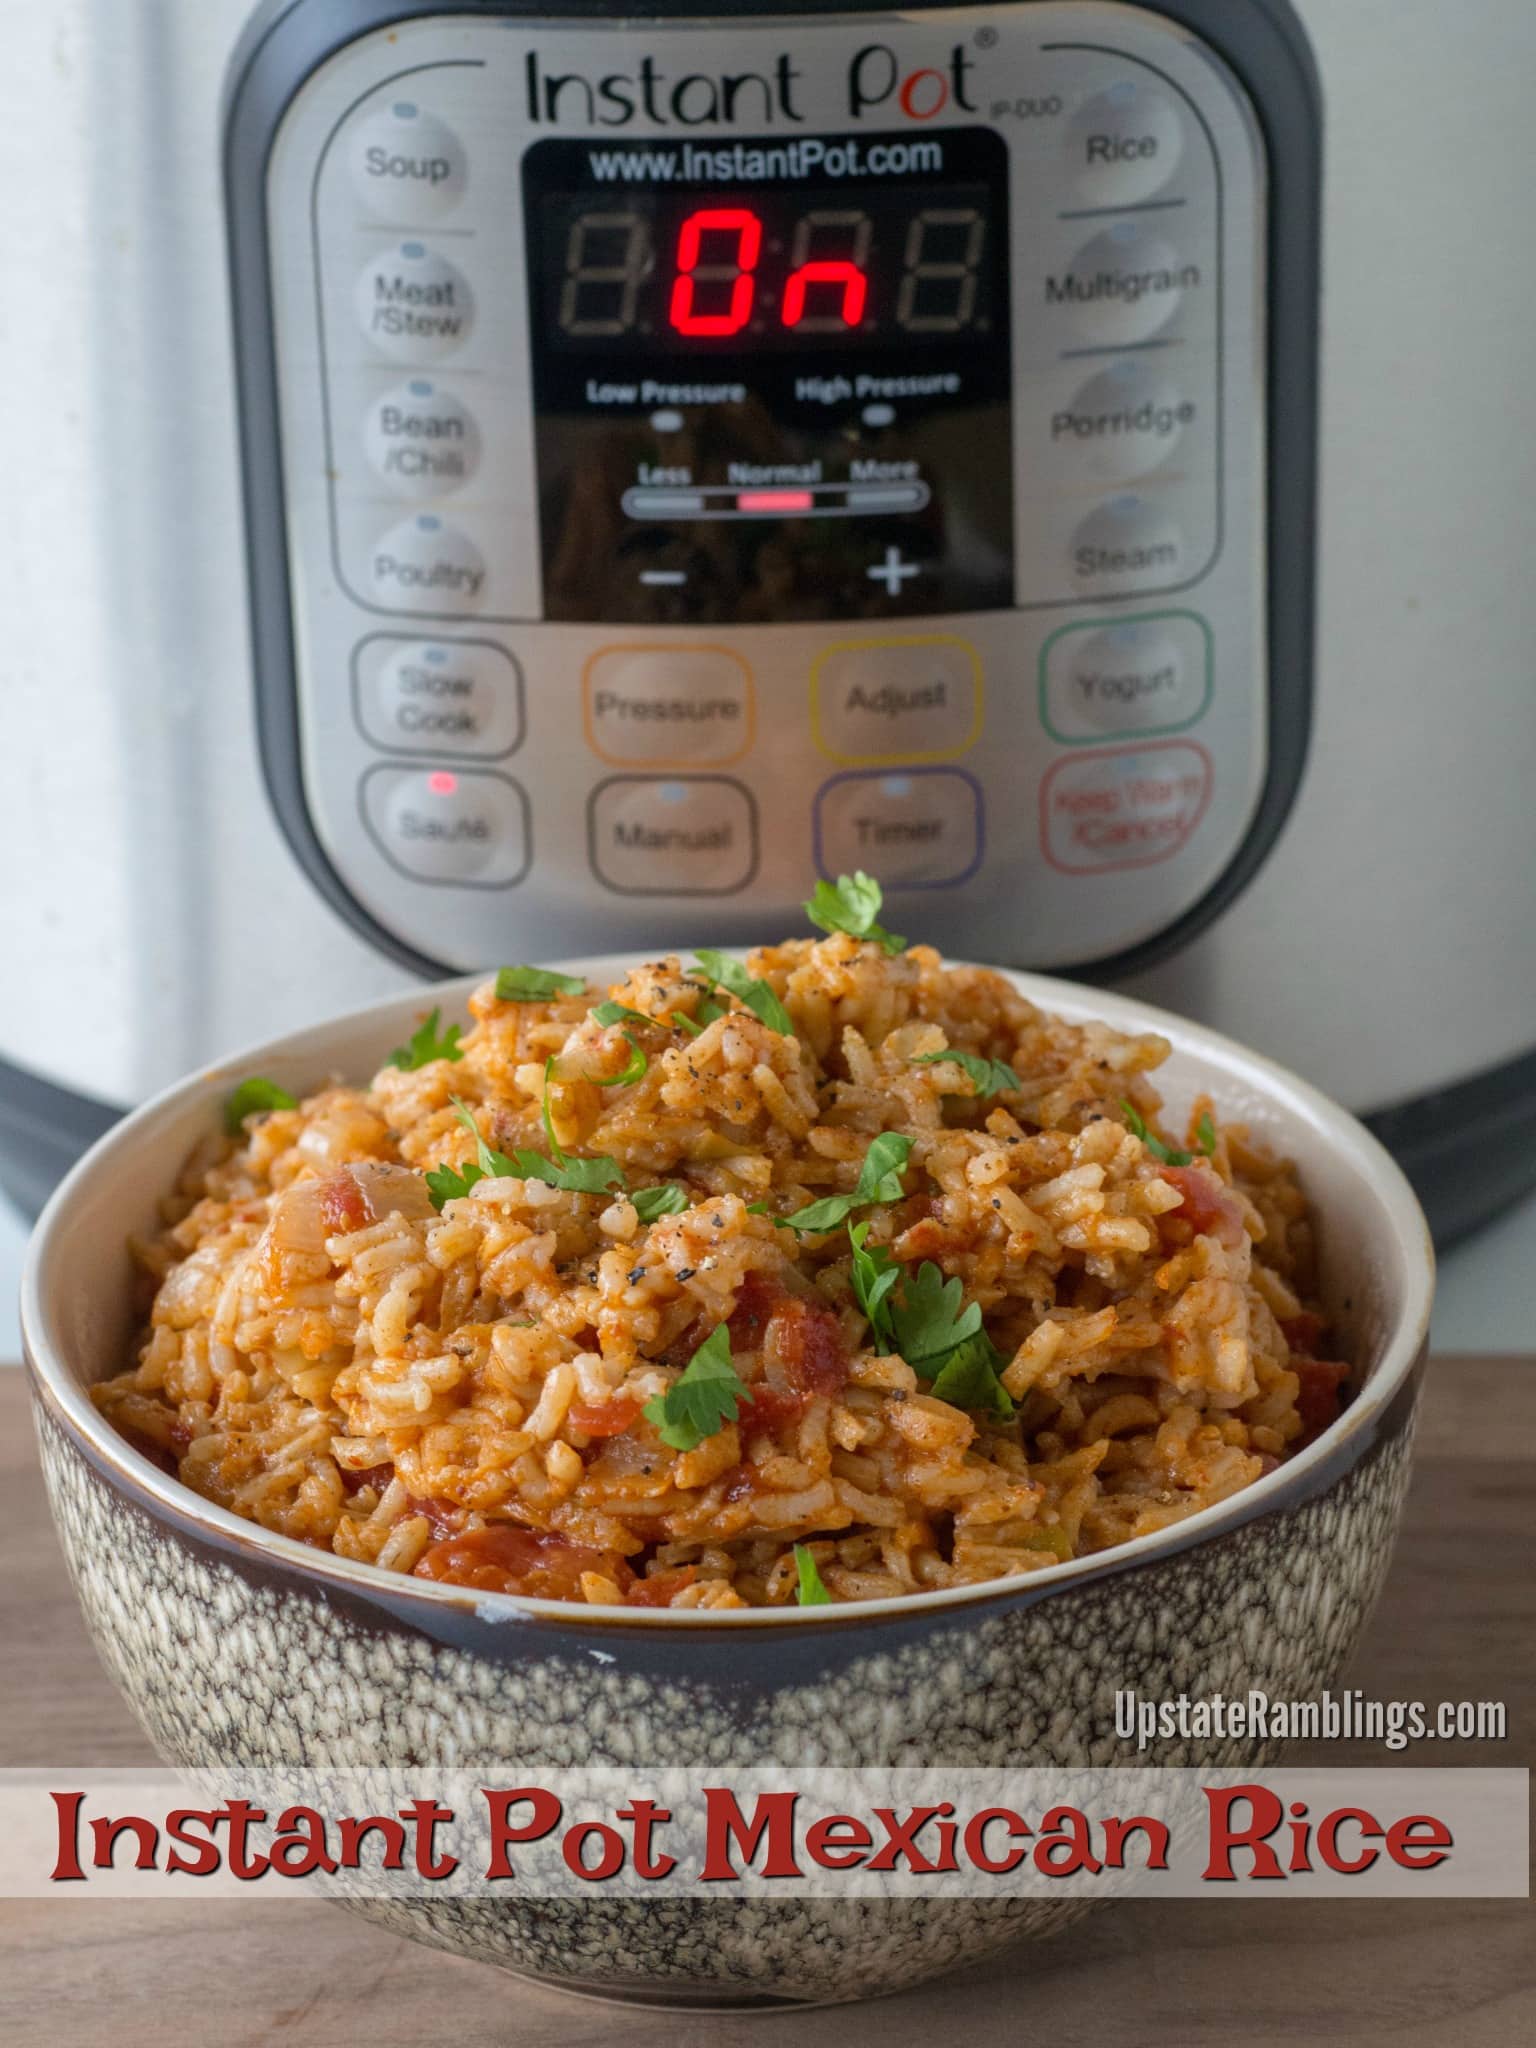 Instant Pot Mexican rice